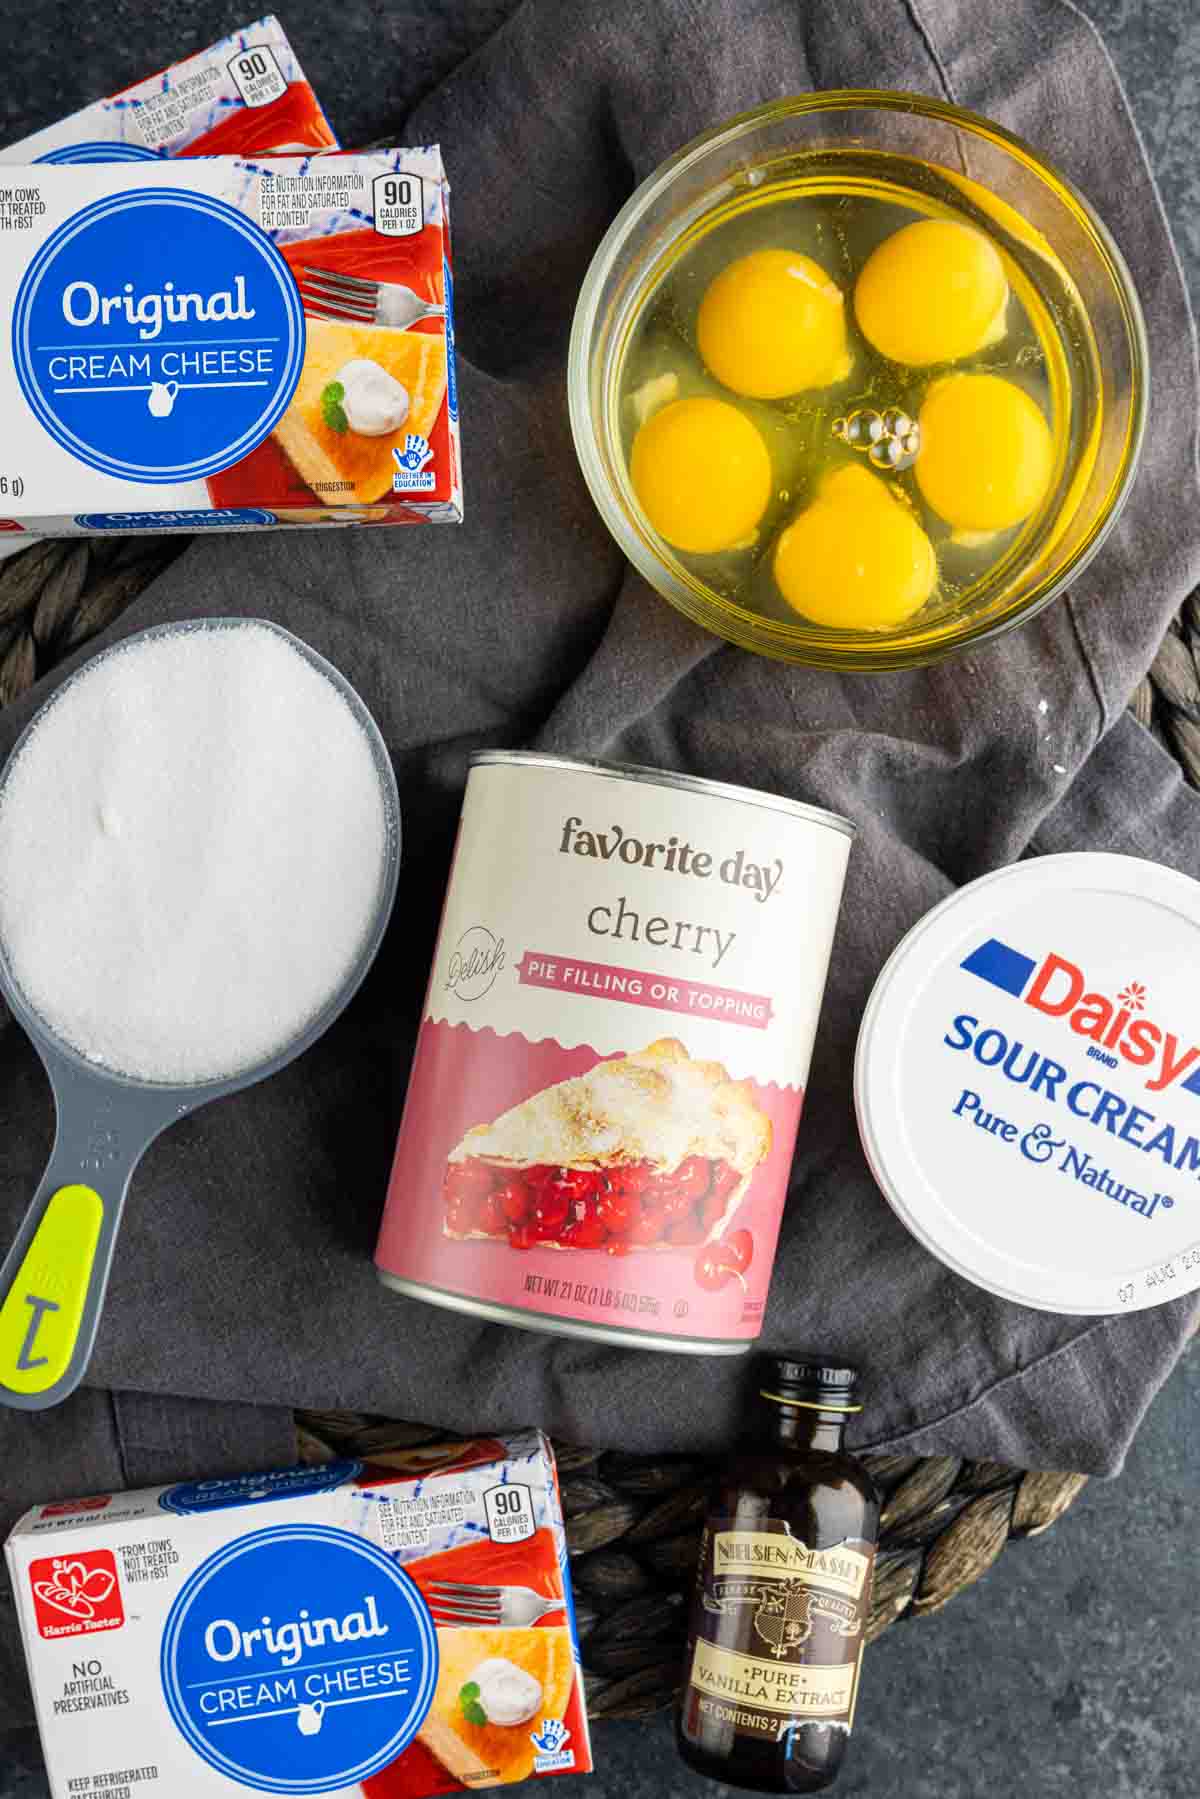 The ingredients for a Mini cheesecake are shown on a table.